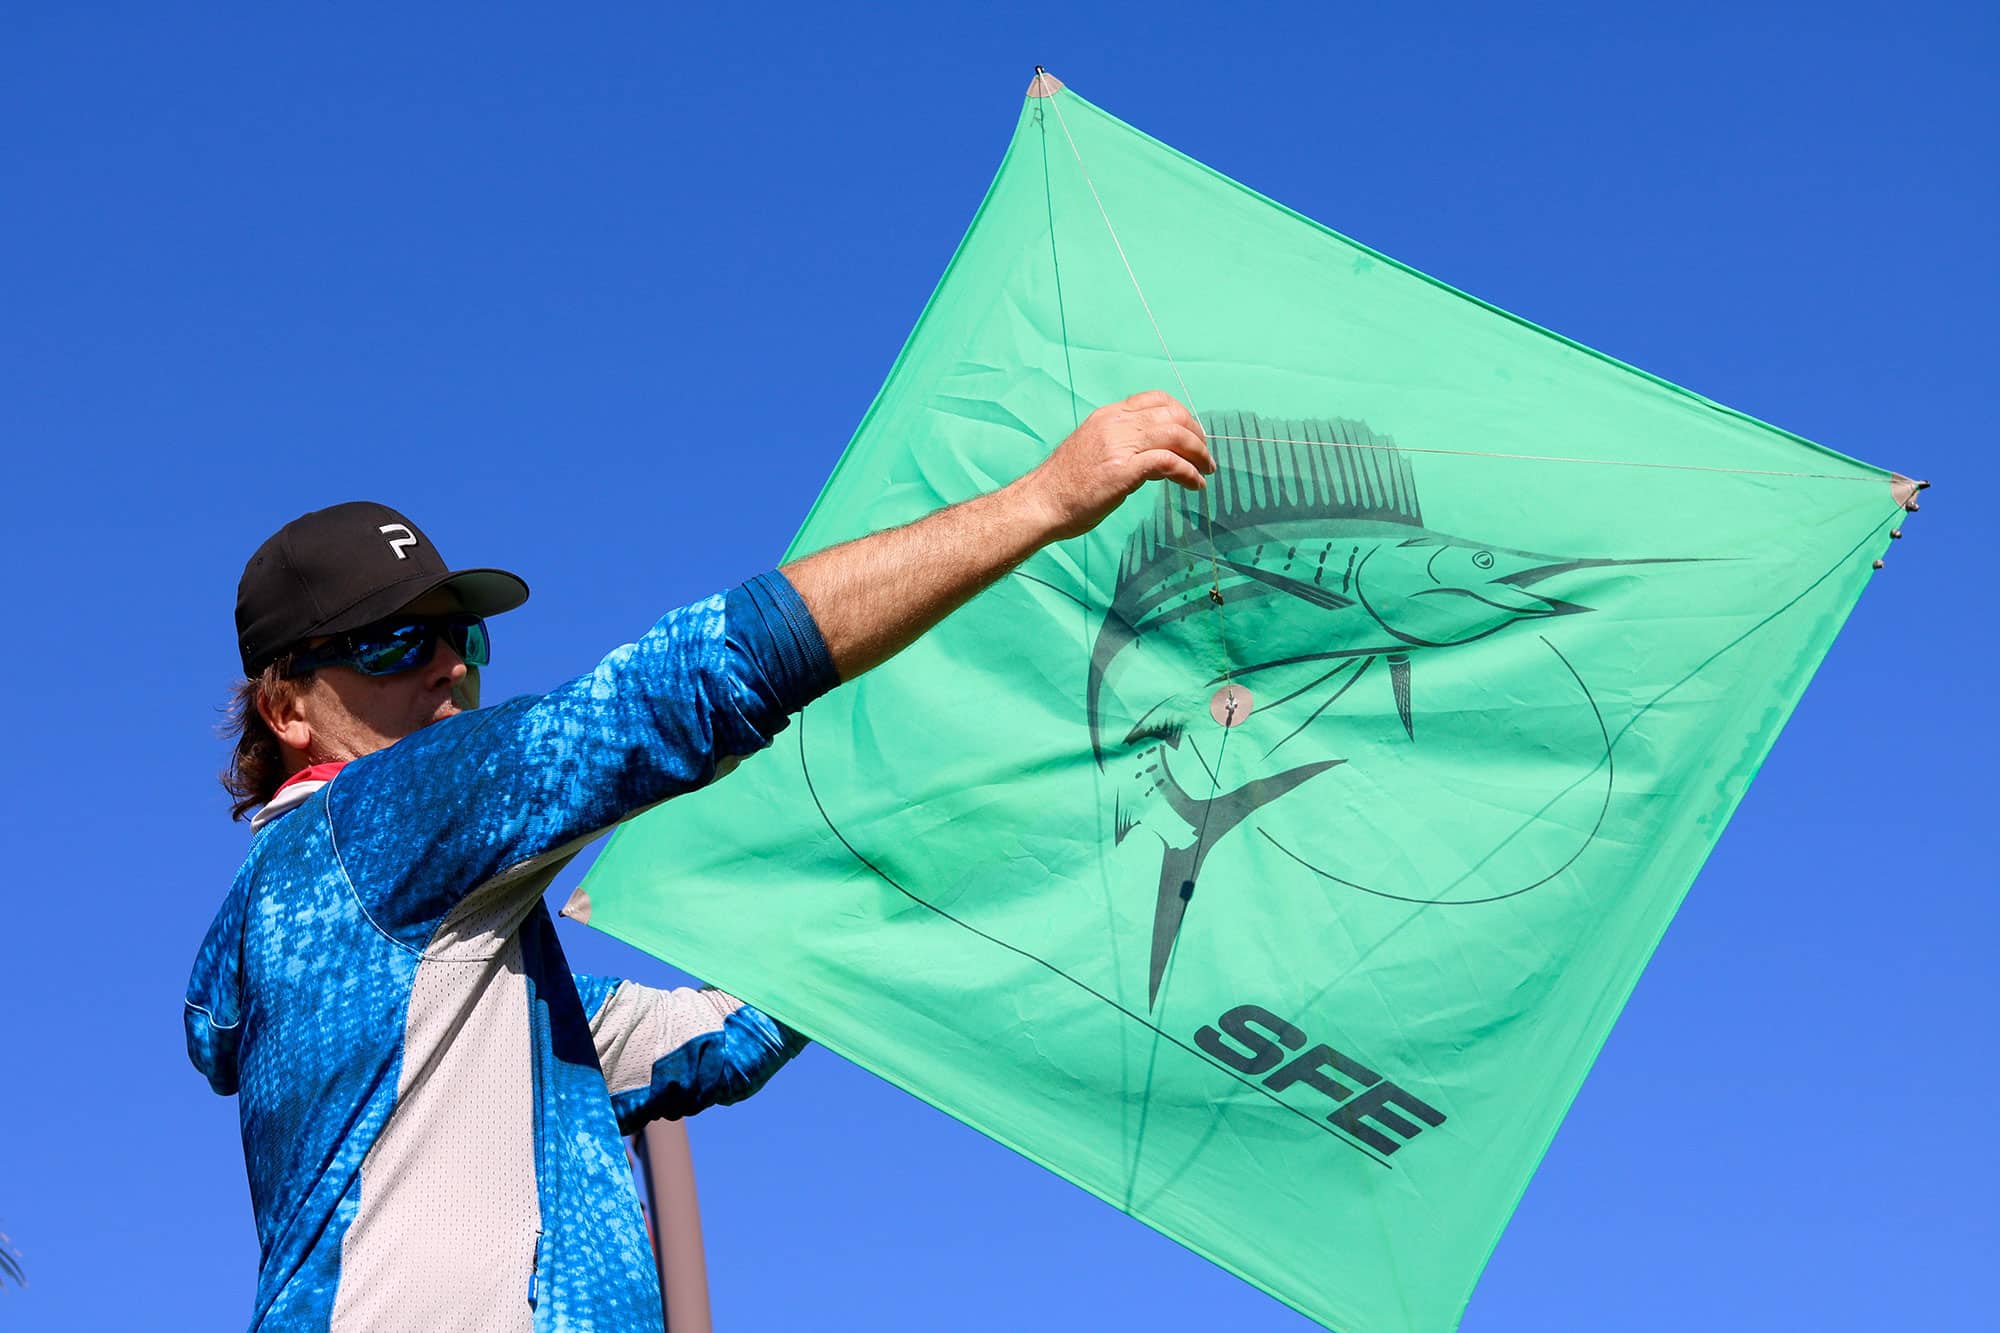 Kite-Fishing Tips from the Pros